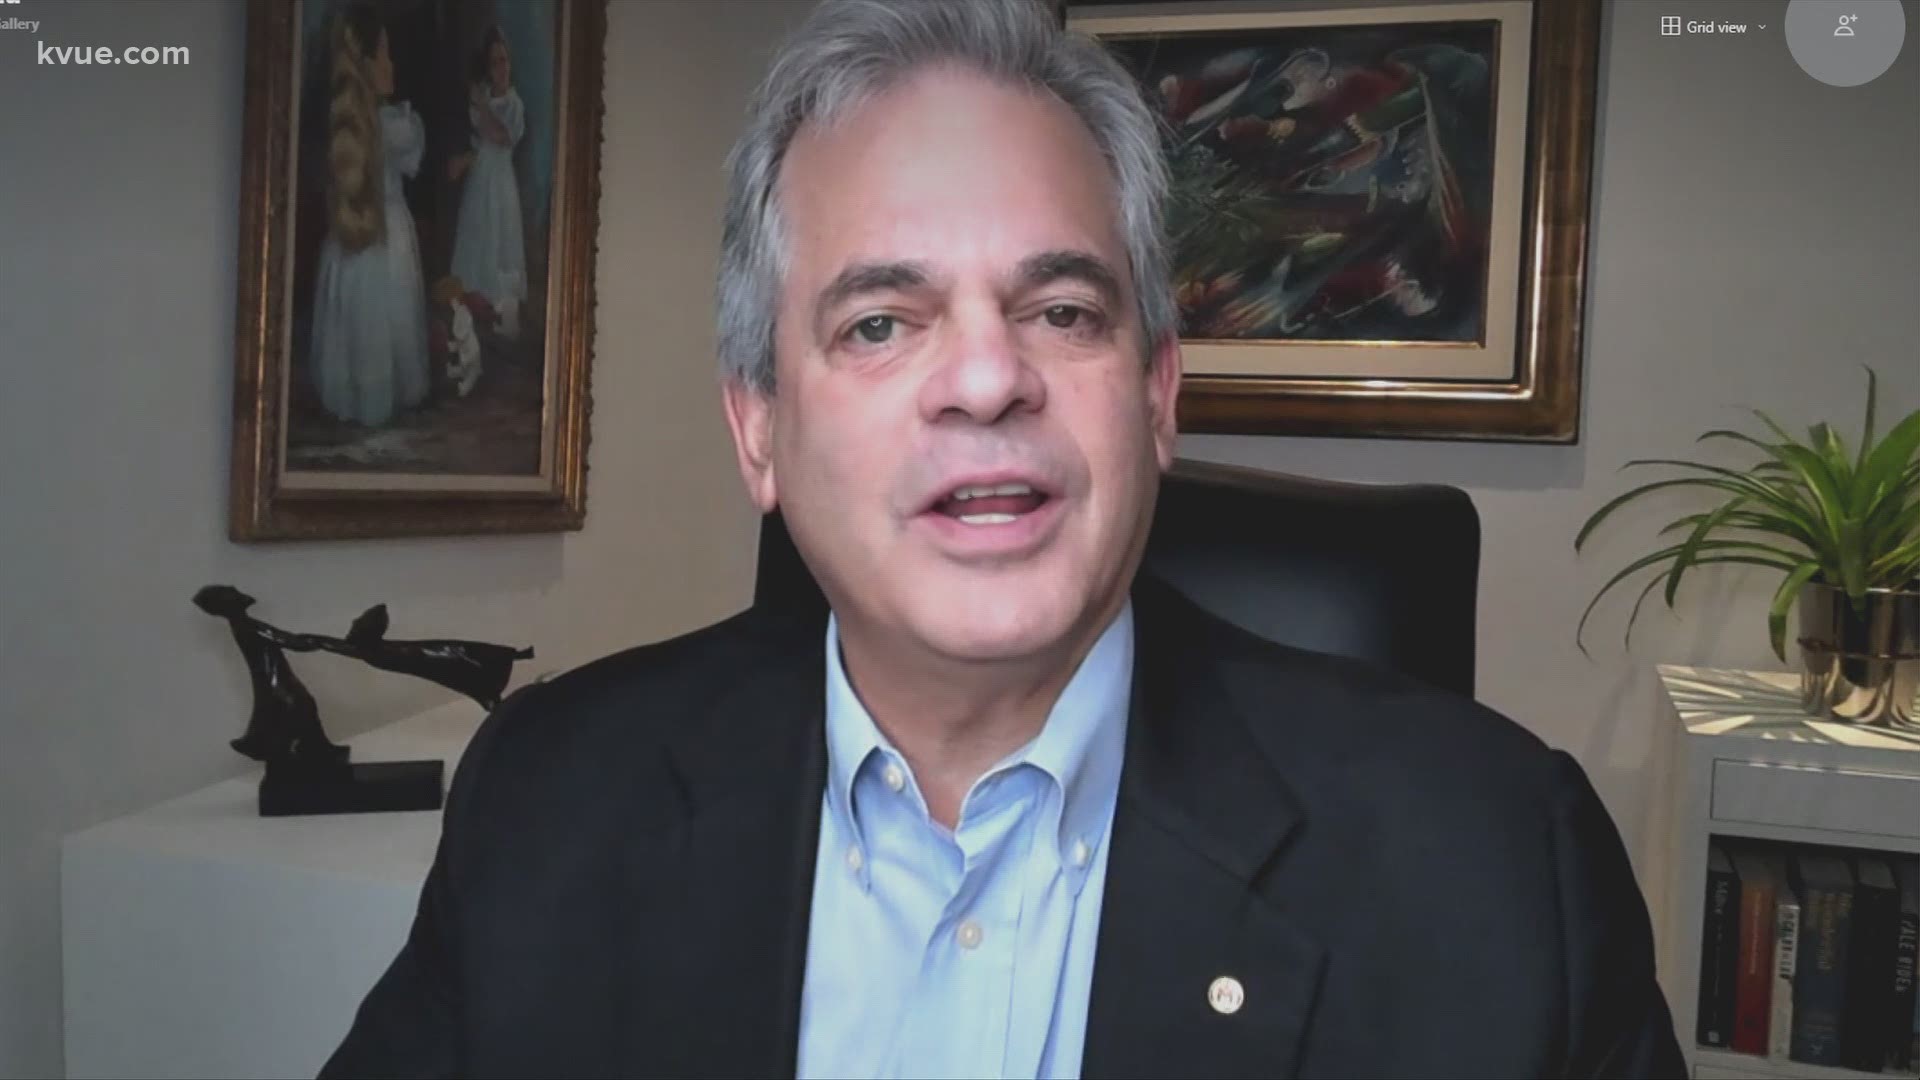 Mayor Steve Adler joins us to discuss more about the pandemic and Austin's fight against it.